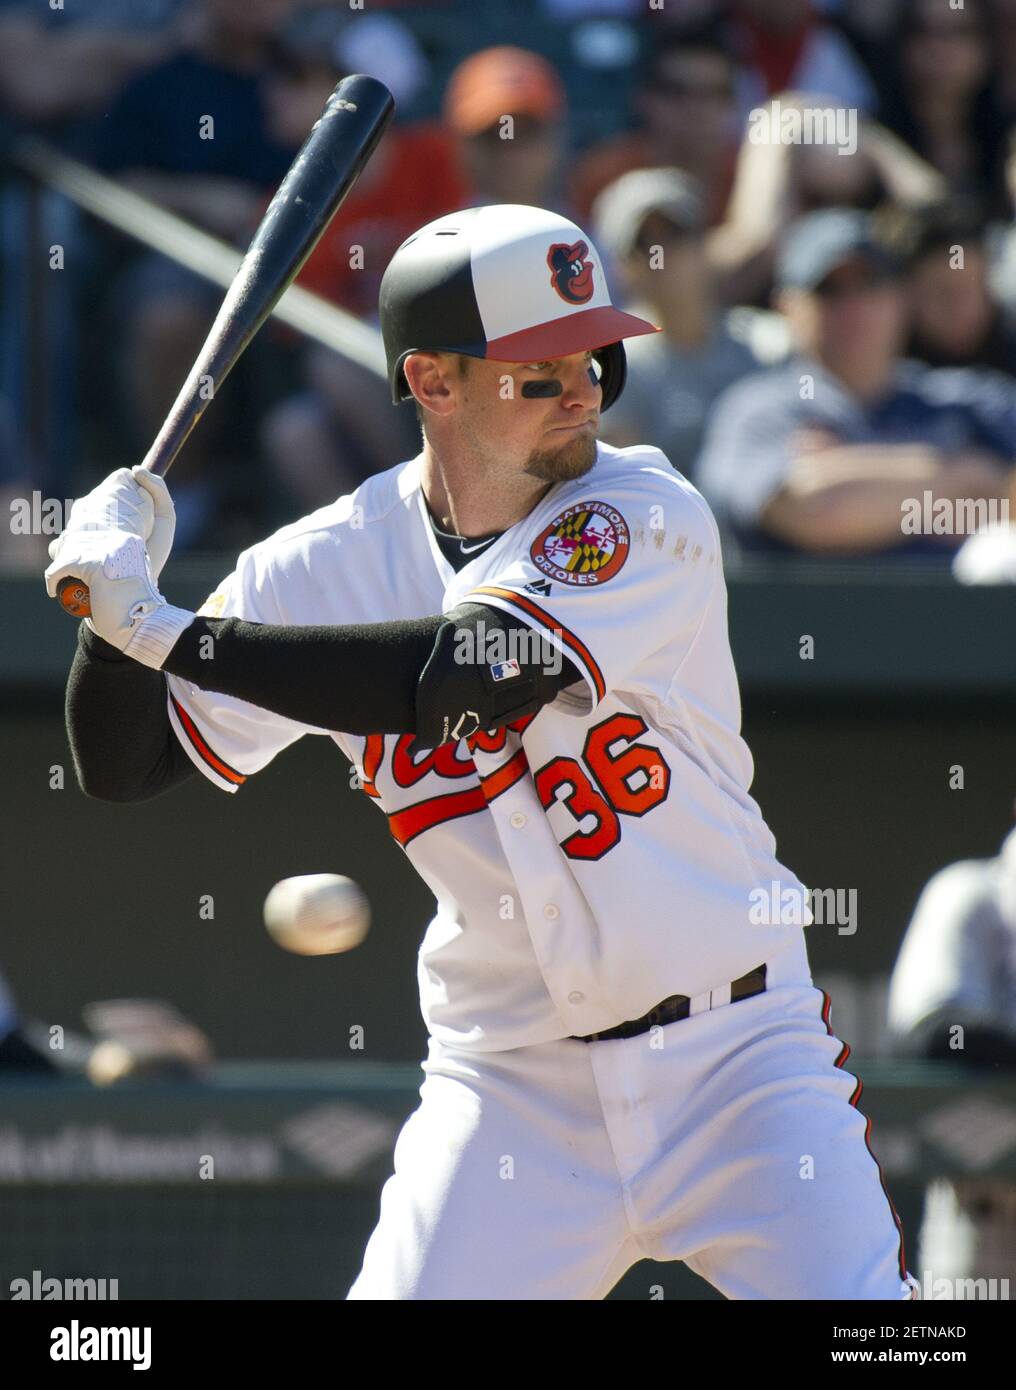 Baltimore Orioles catcher Caleb Joseph (36) bats in the sixth inning  against the New York Yankees at Oriole Park at Camden Yards in Baltimore,  MD on Sunday, April 9, 2017. The Yankees